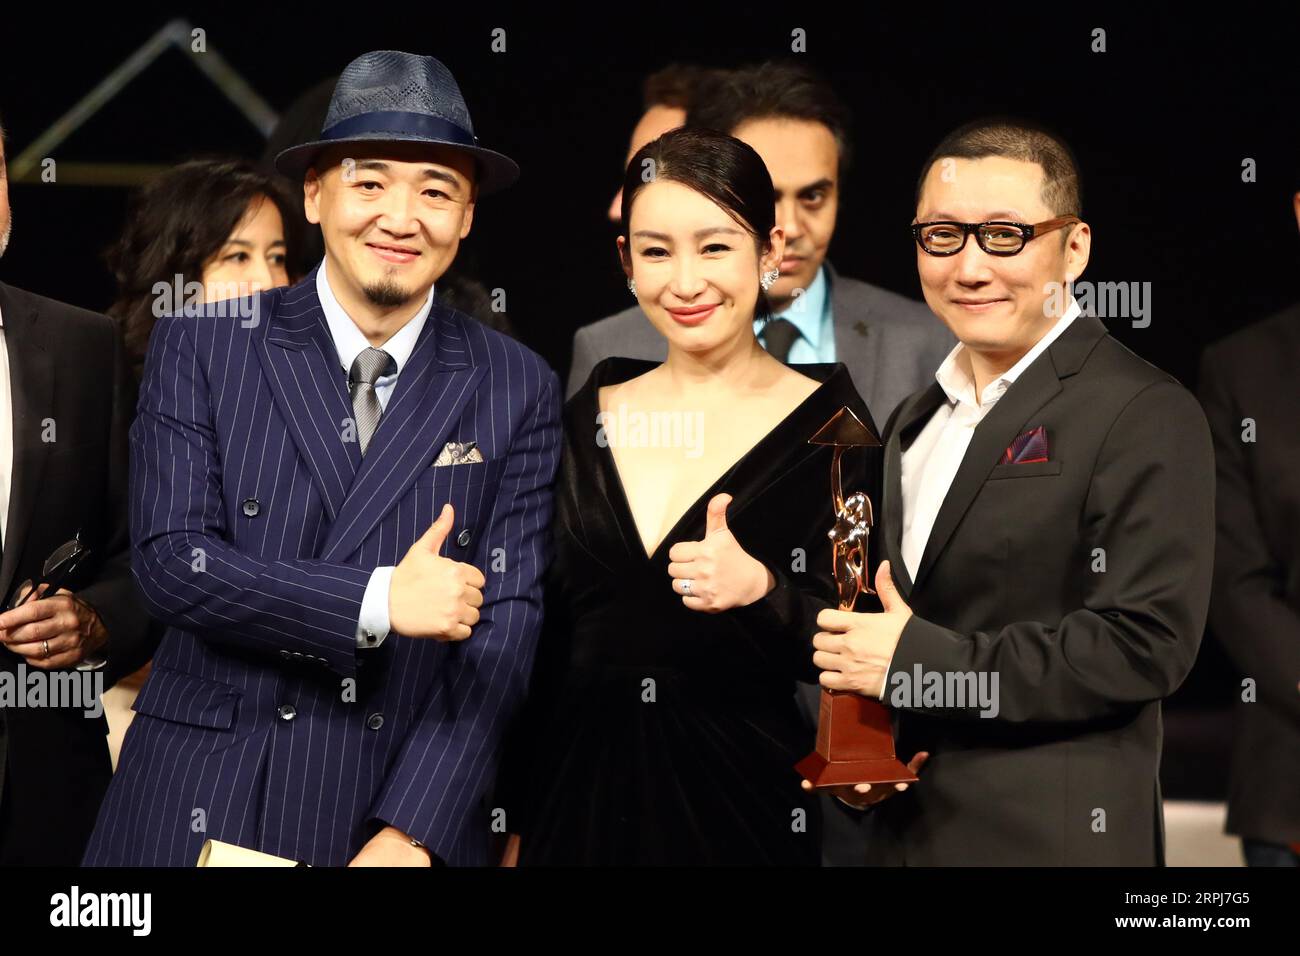 191129 -- CAIRO, Nov. 29, 2019 -- Director Zhang Chong L and Zhang Bo R of Chinese movie The Fourth Wall and Chinese actress Qin Hailu, who is a member of the international jury, pose for a photo during the awarding ceremony of Cairo International Film Festival in Cairo, Egypt, on Nov. 29, 2019. The 41st edition of Egypt s Cairo International Film Festival CIFF concluded Friday night at Cairo Opera House with China s movie The Fourth Wall winning an award at the official film section competition. Ahmed Gomaa EGYPT-CAIRO-INT L FILM FESTIVAL-AWARDING CEREMONY AixHamaidegema PUBLICATIONxNOTxINxCH Stock Photo